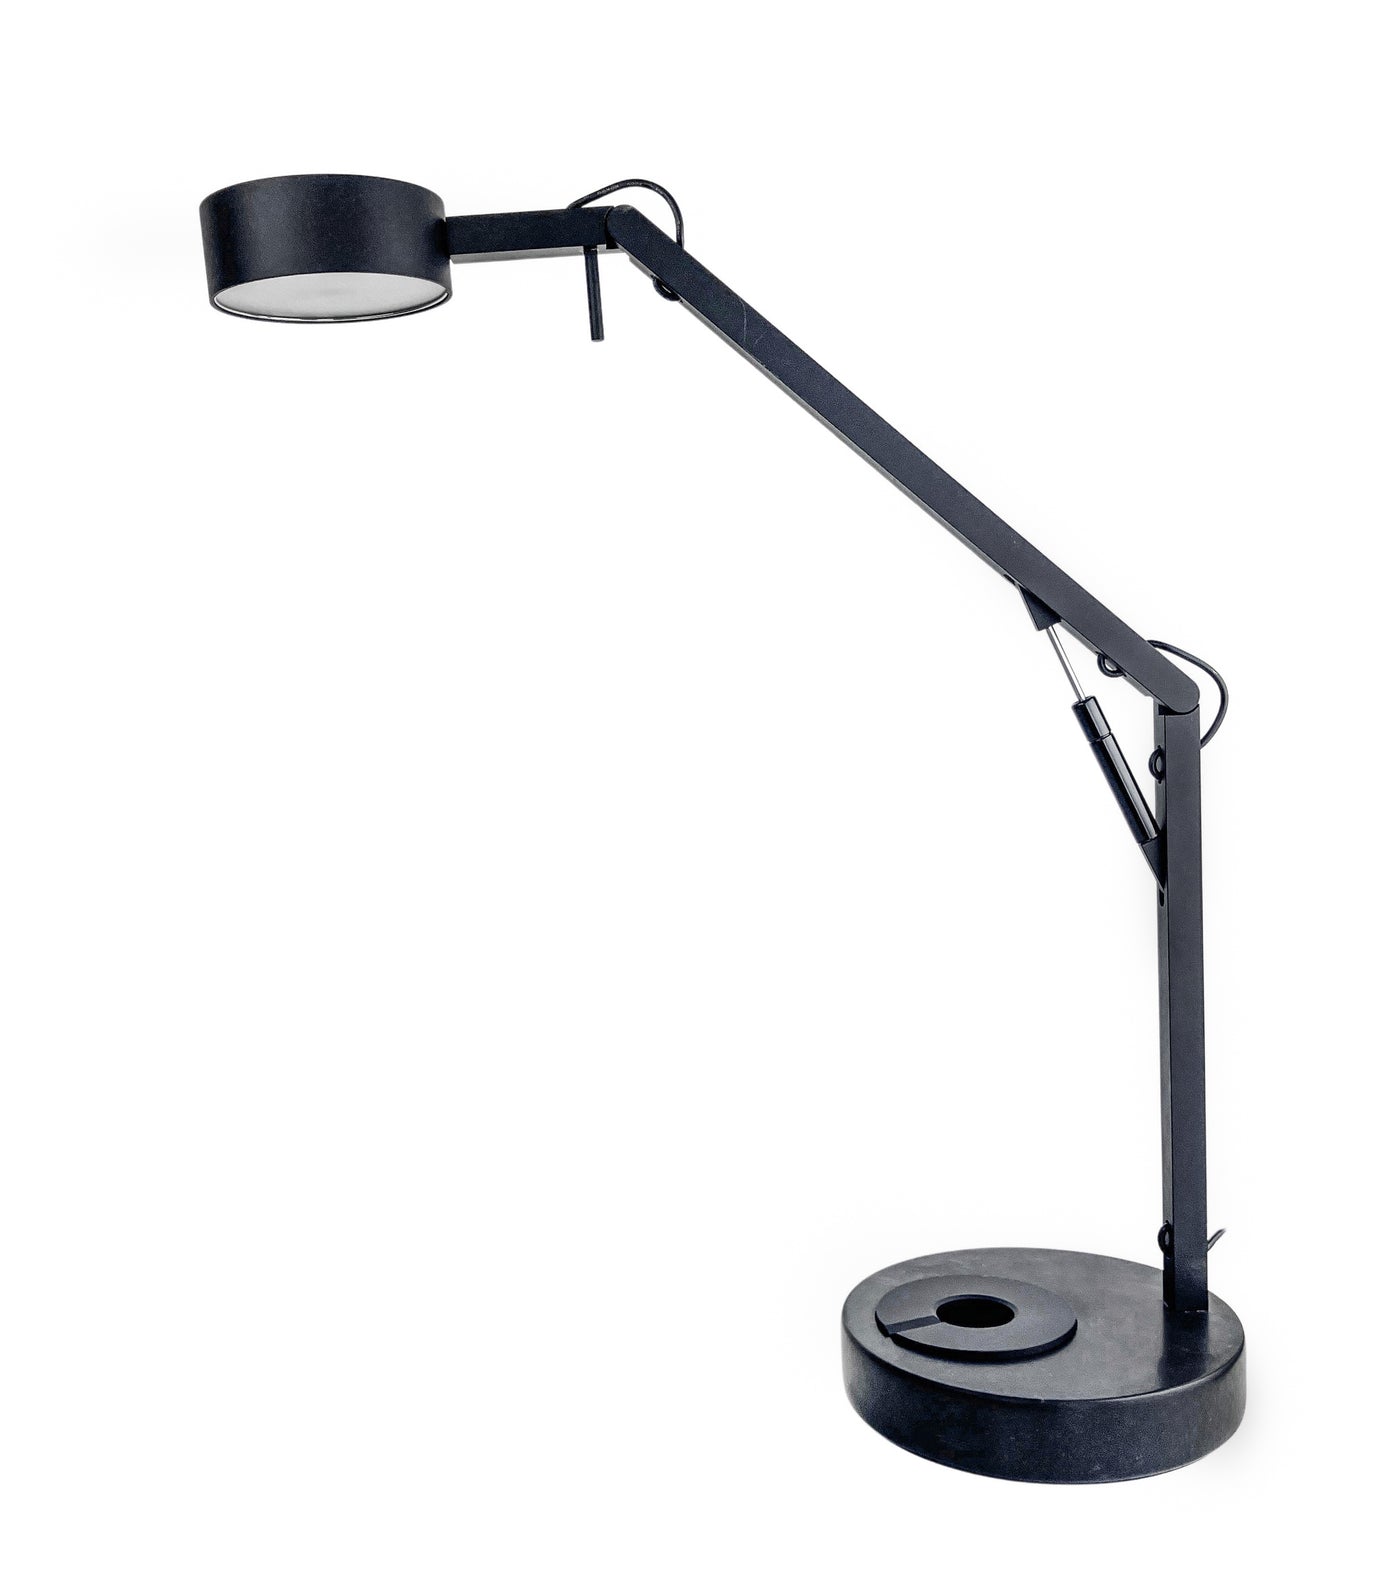 Swing Arm Strut Lamp in Black - Discounts on Houseplant at UAL